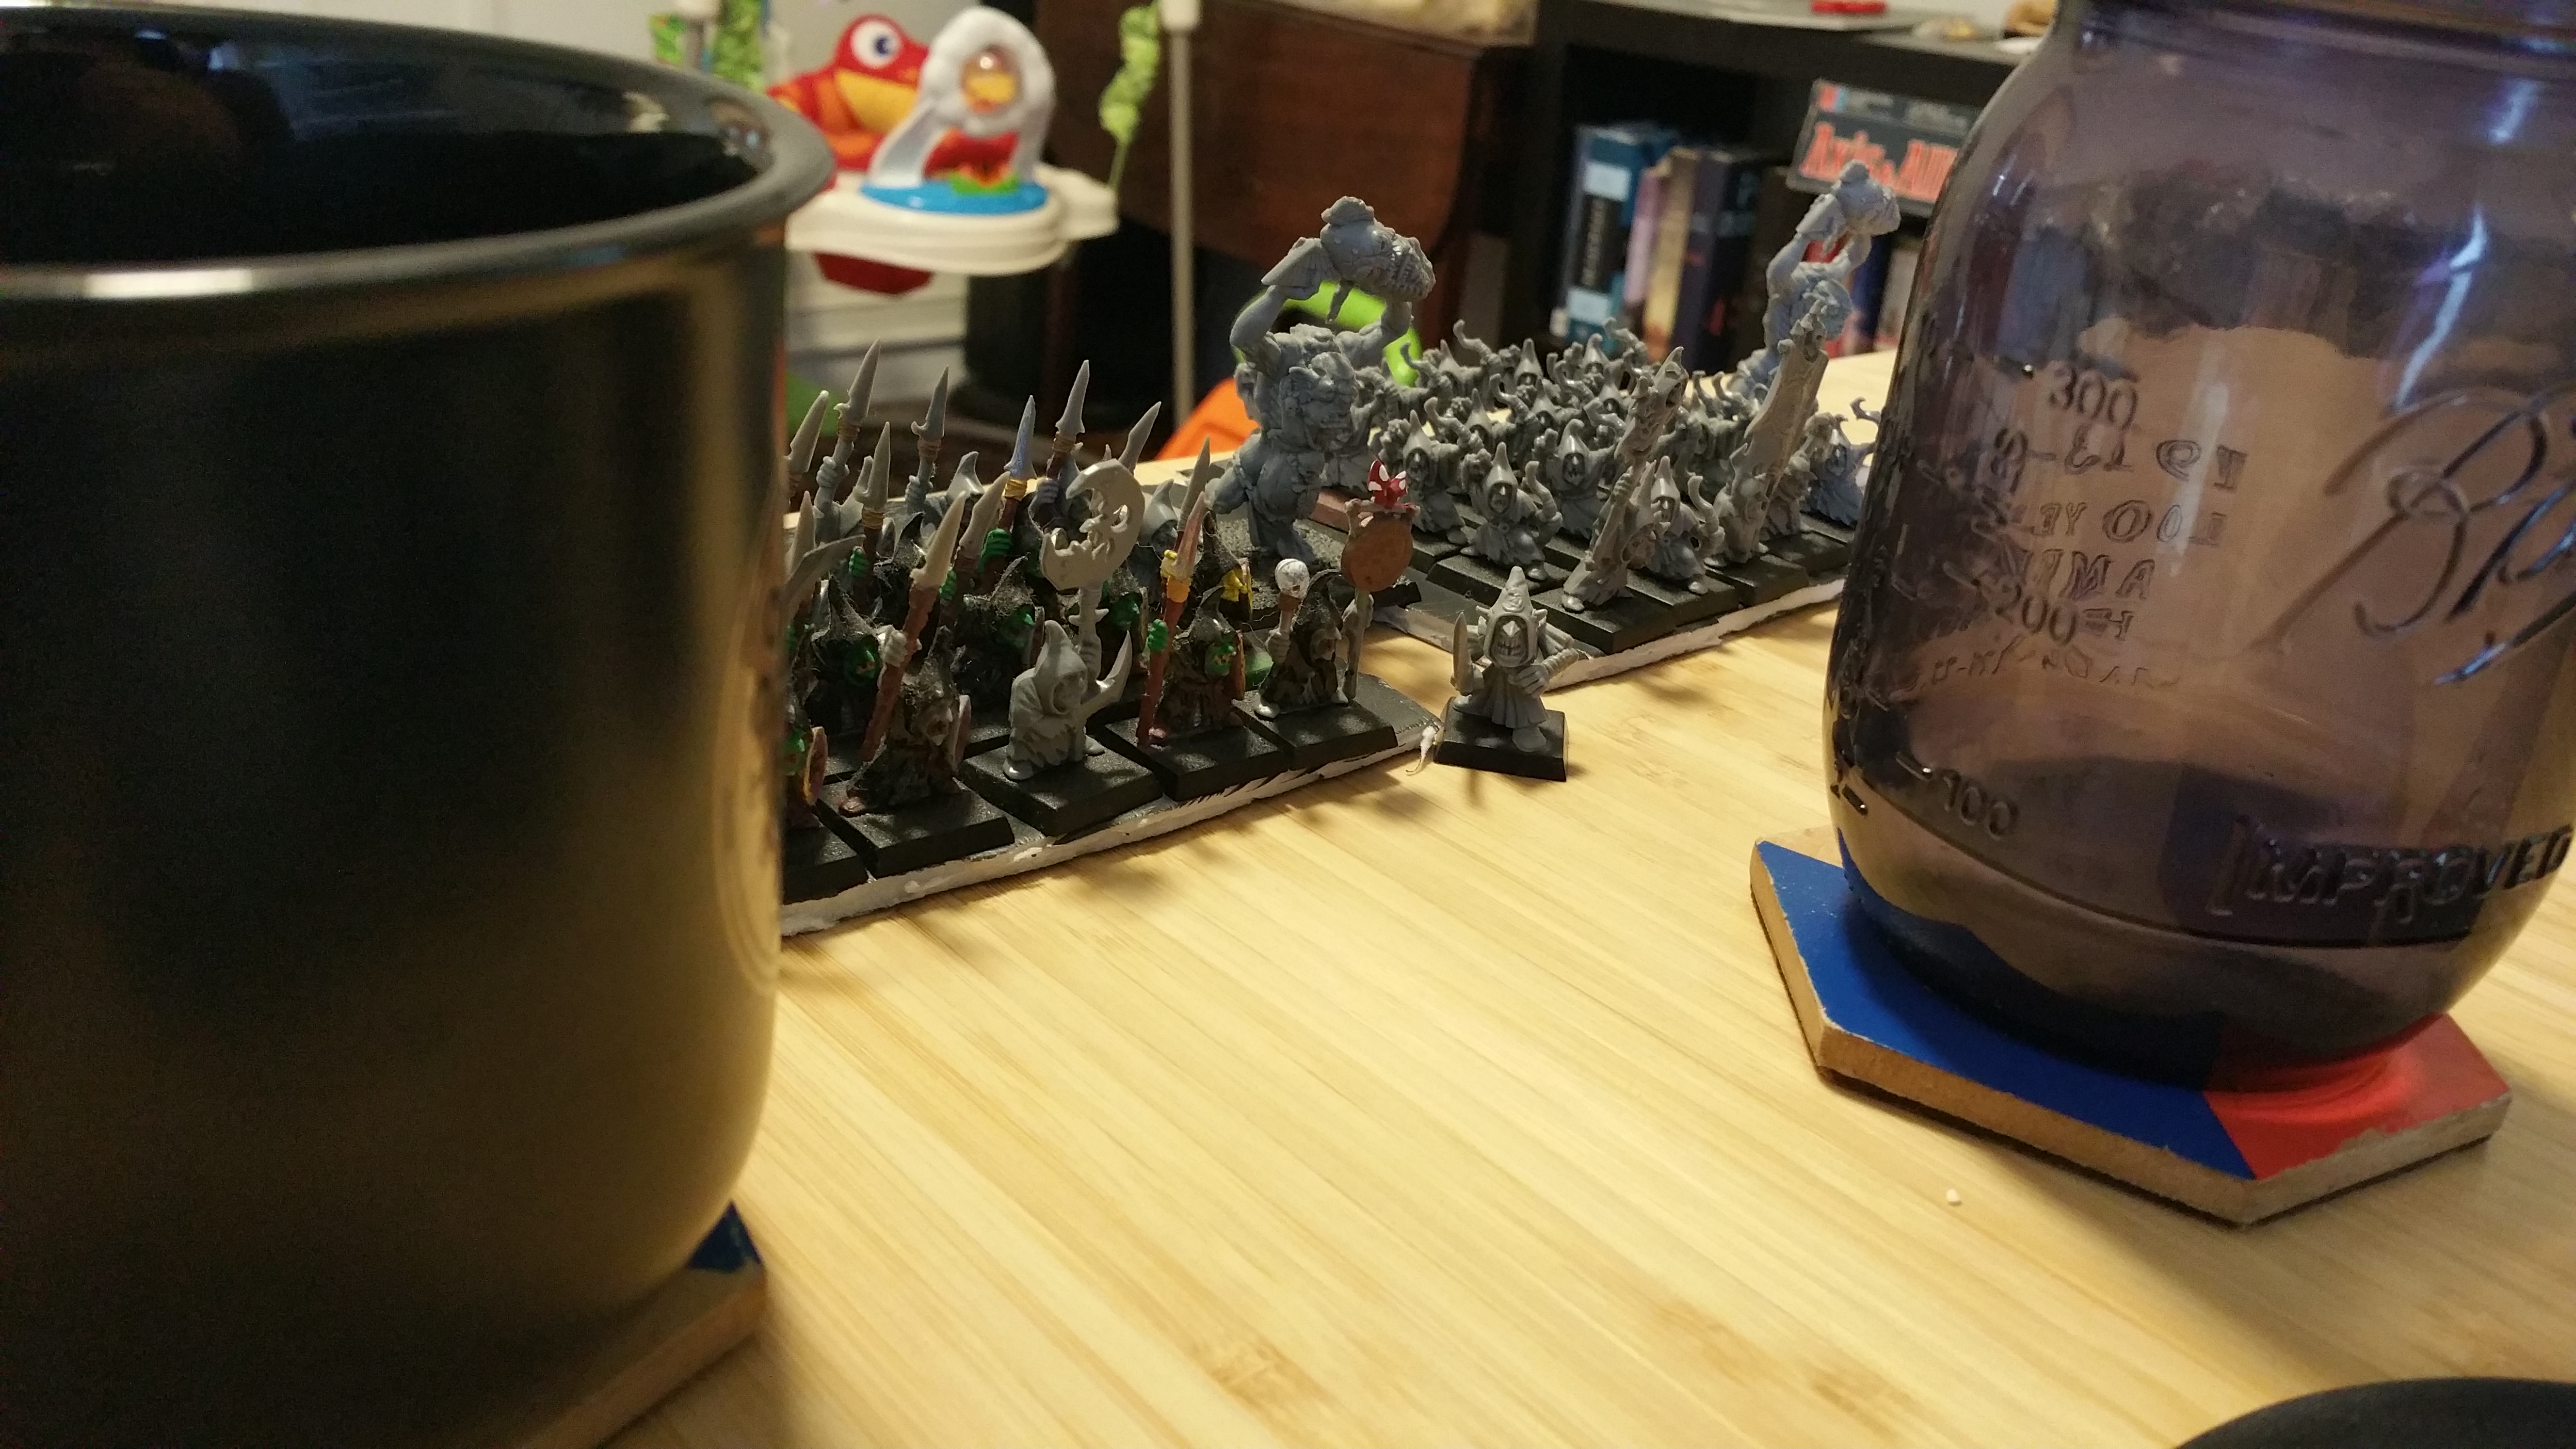 The goblins have mustered along the left side of the desk